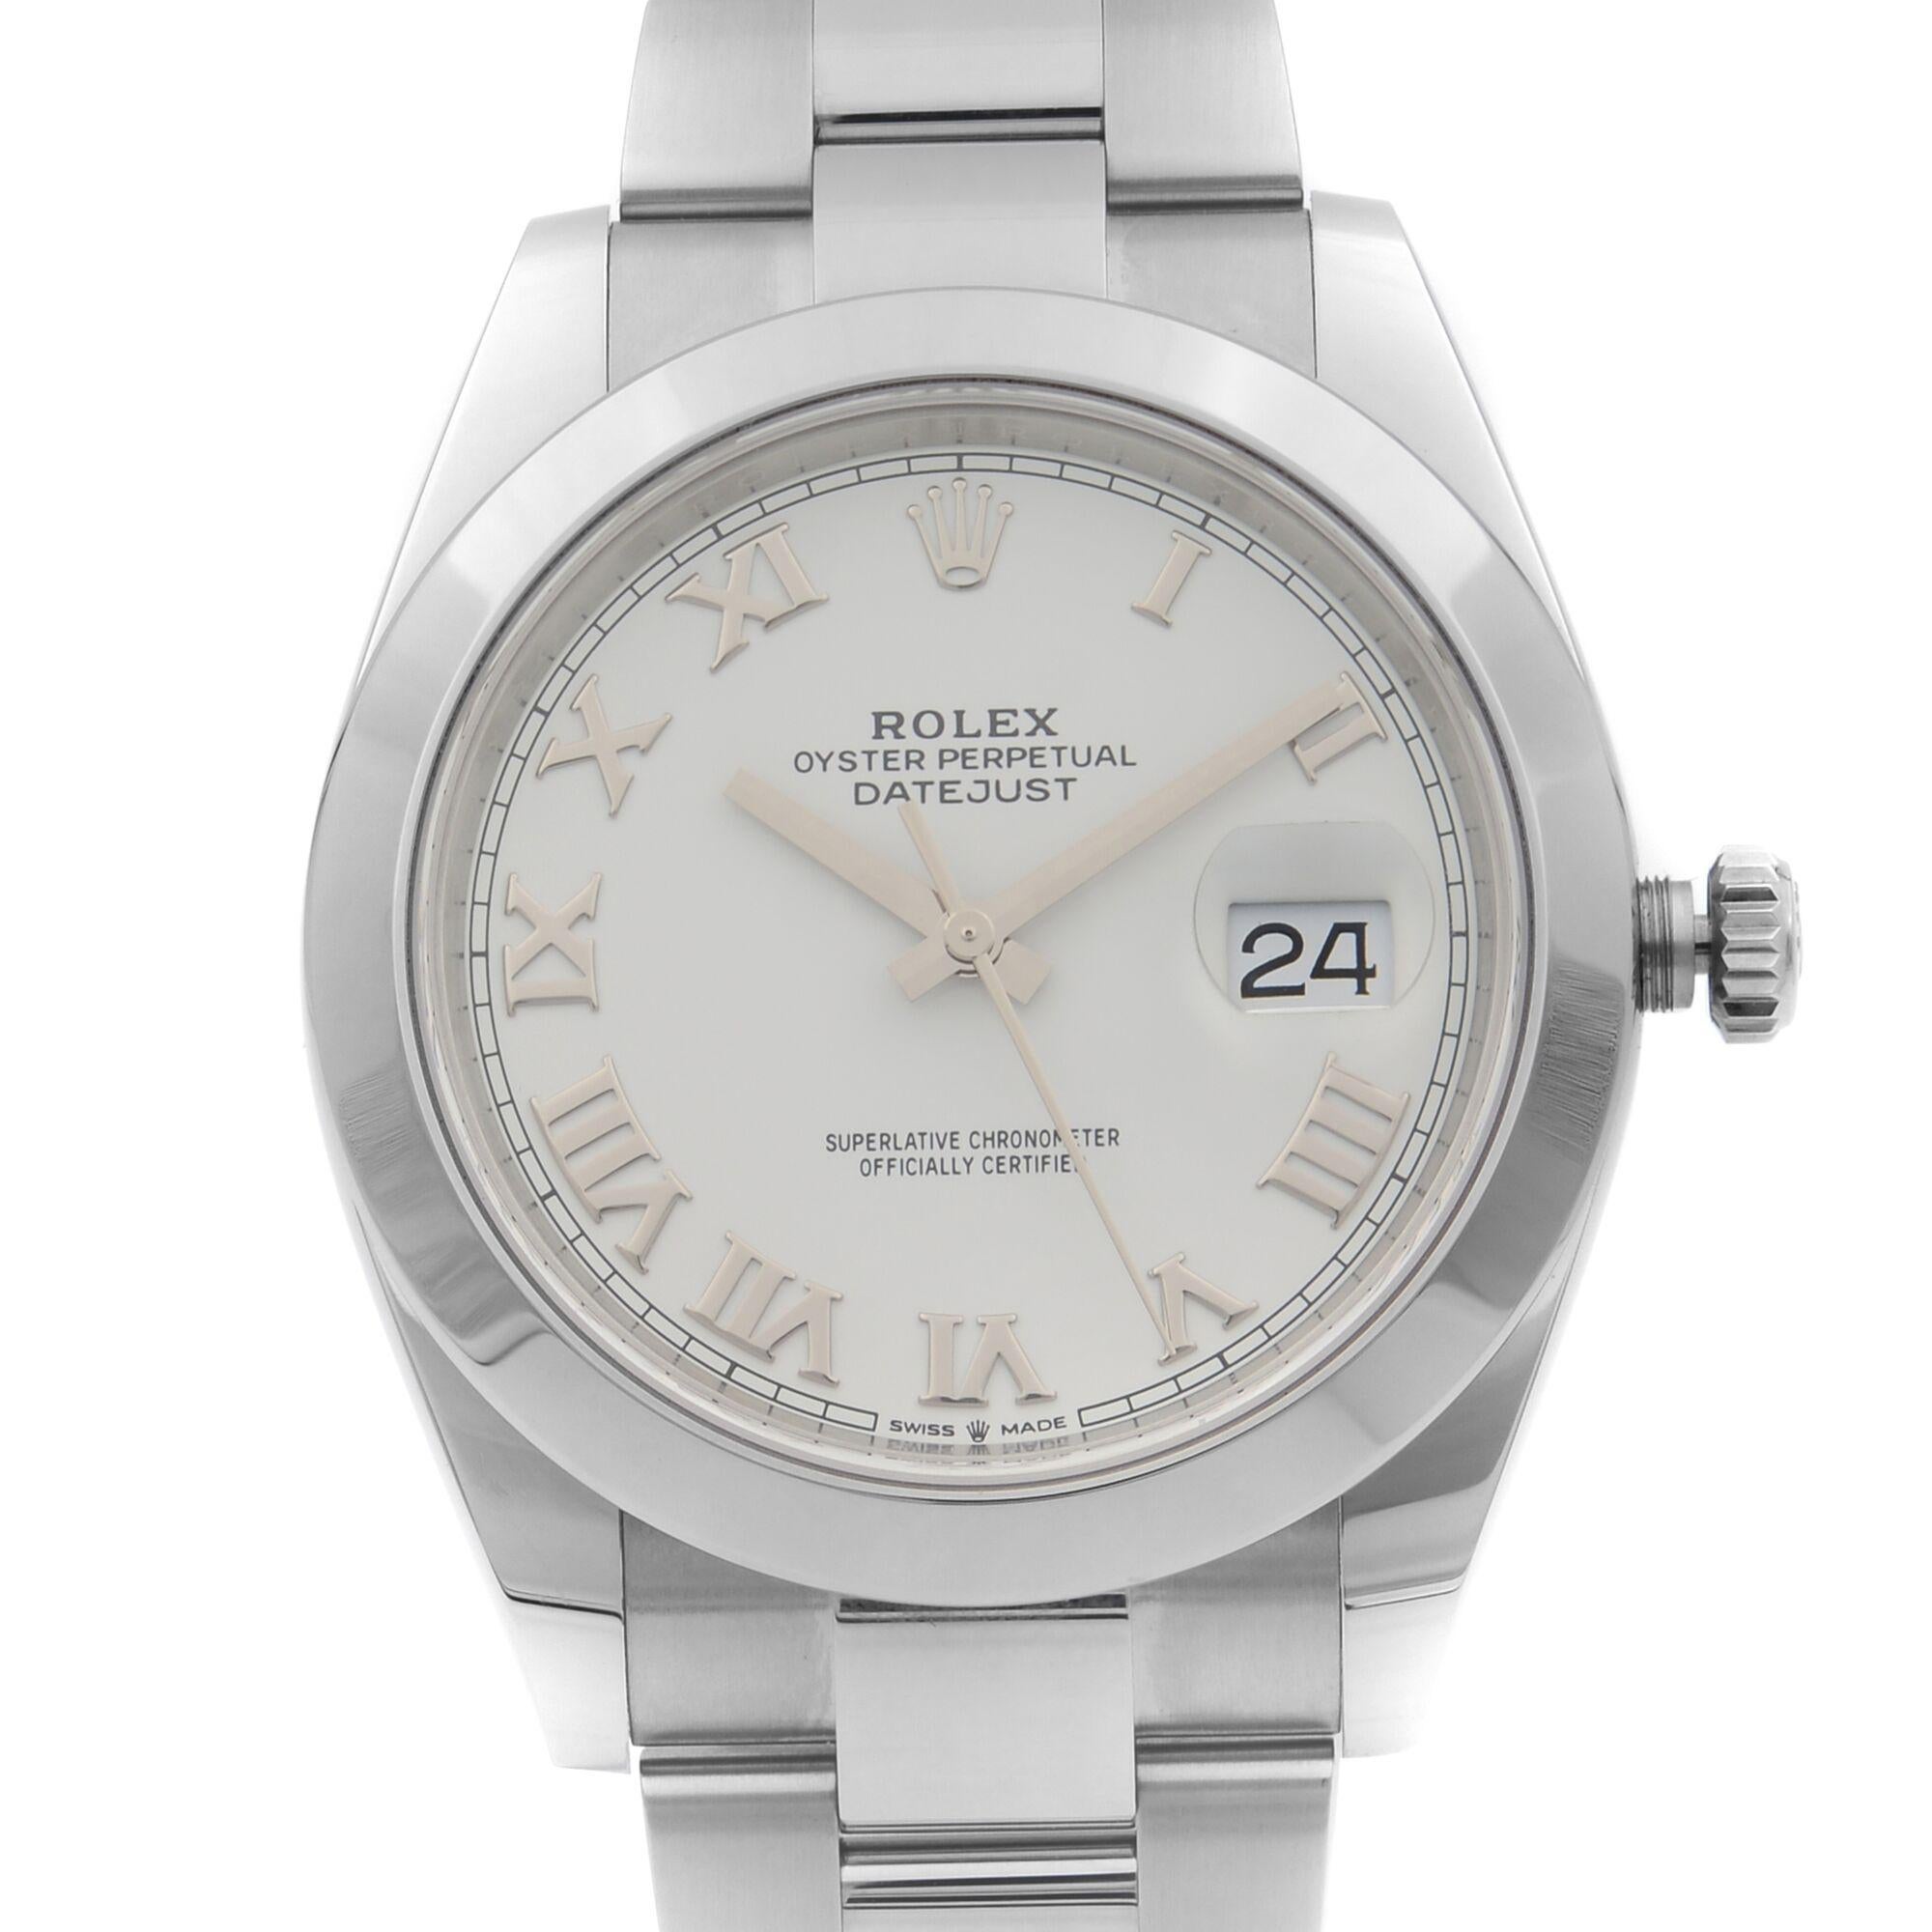 This New Without Tags Rolex Datejust 126300 is a beautiful men's timepiece that is powered by a mechanical (automatic) movement which is cased in a stainless steel case. It has a round shape face, date indicator dial, and has hand roman numerals